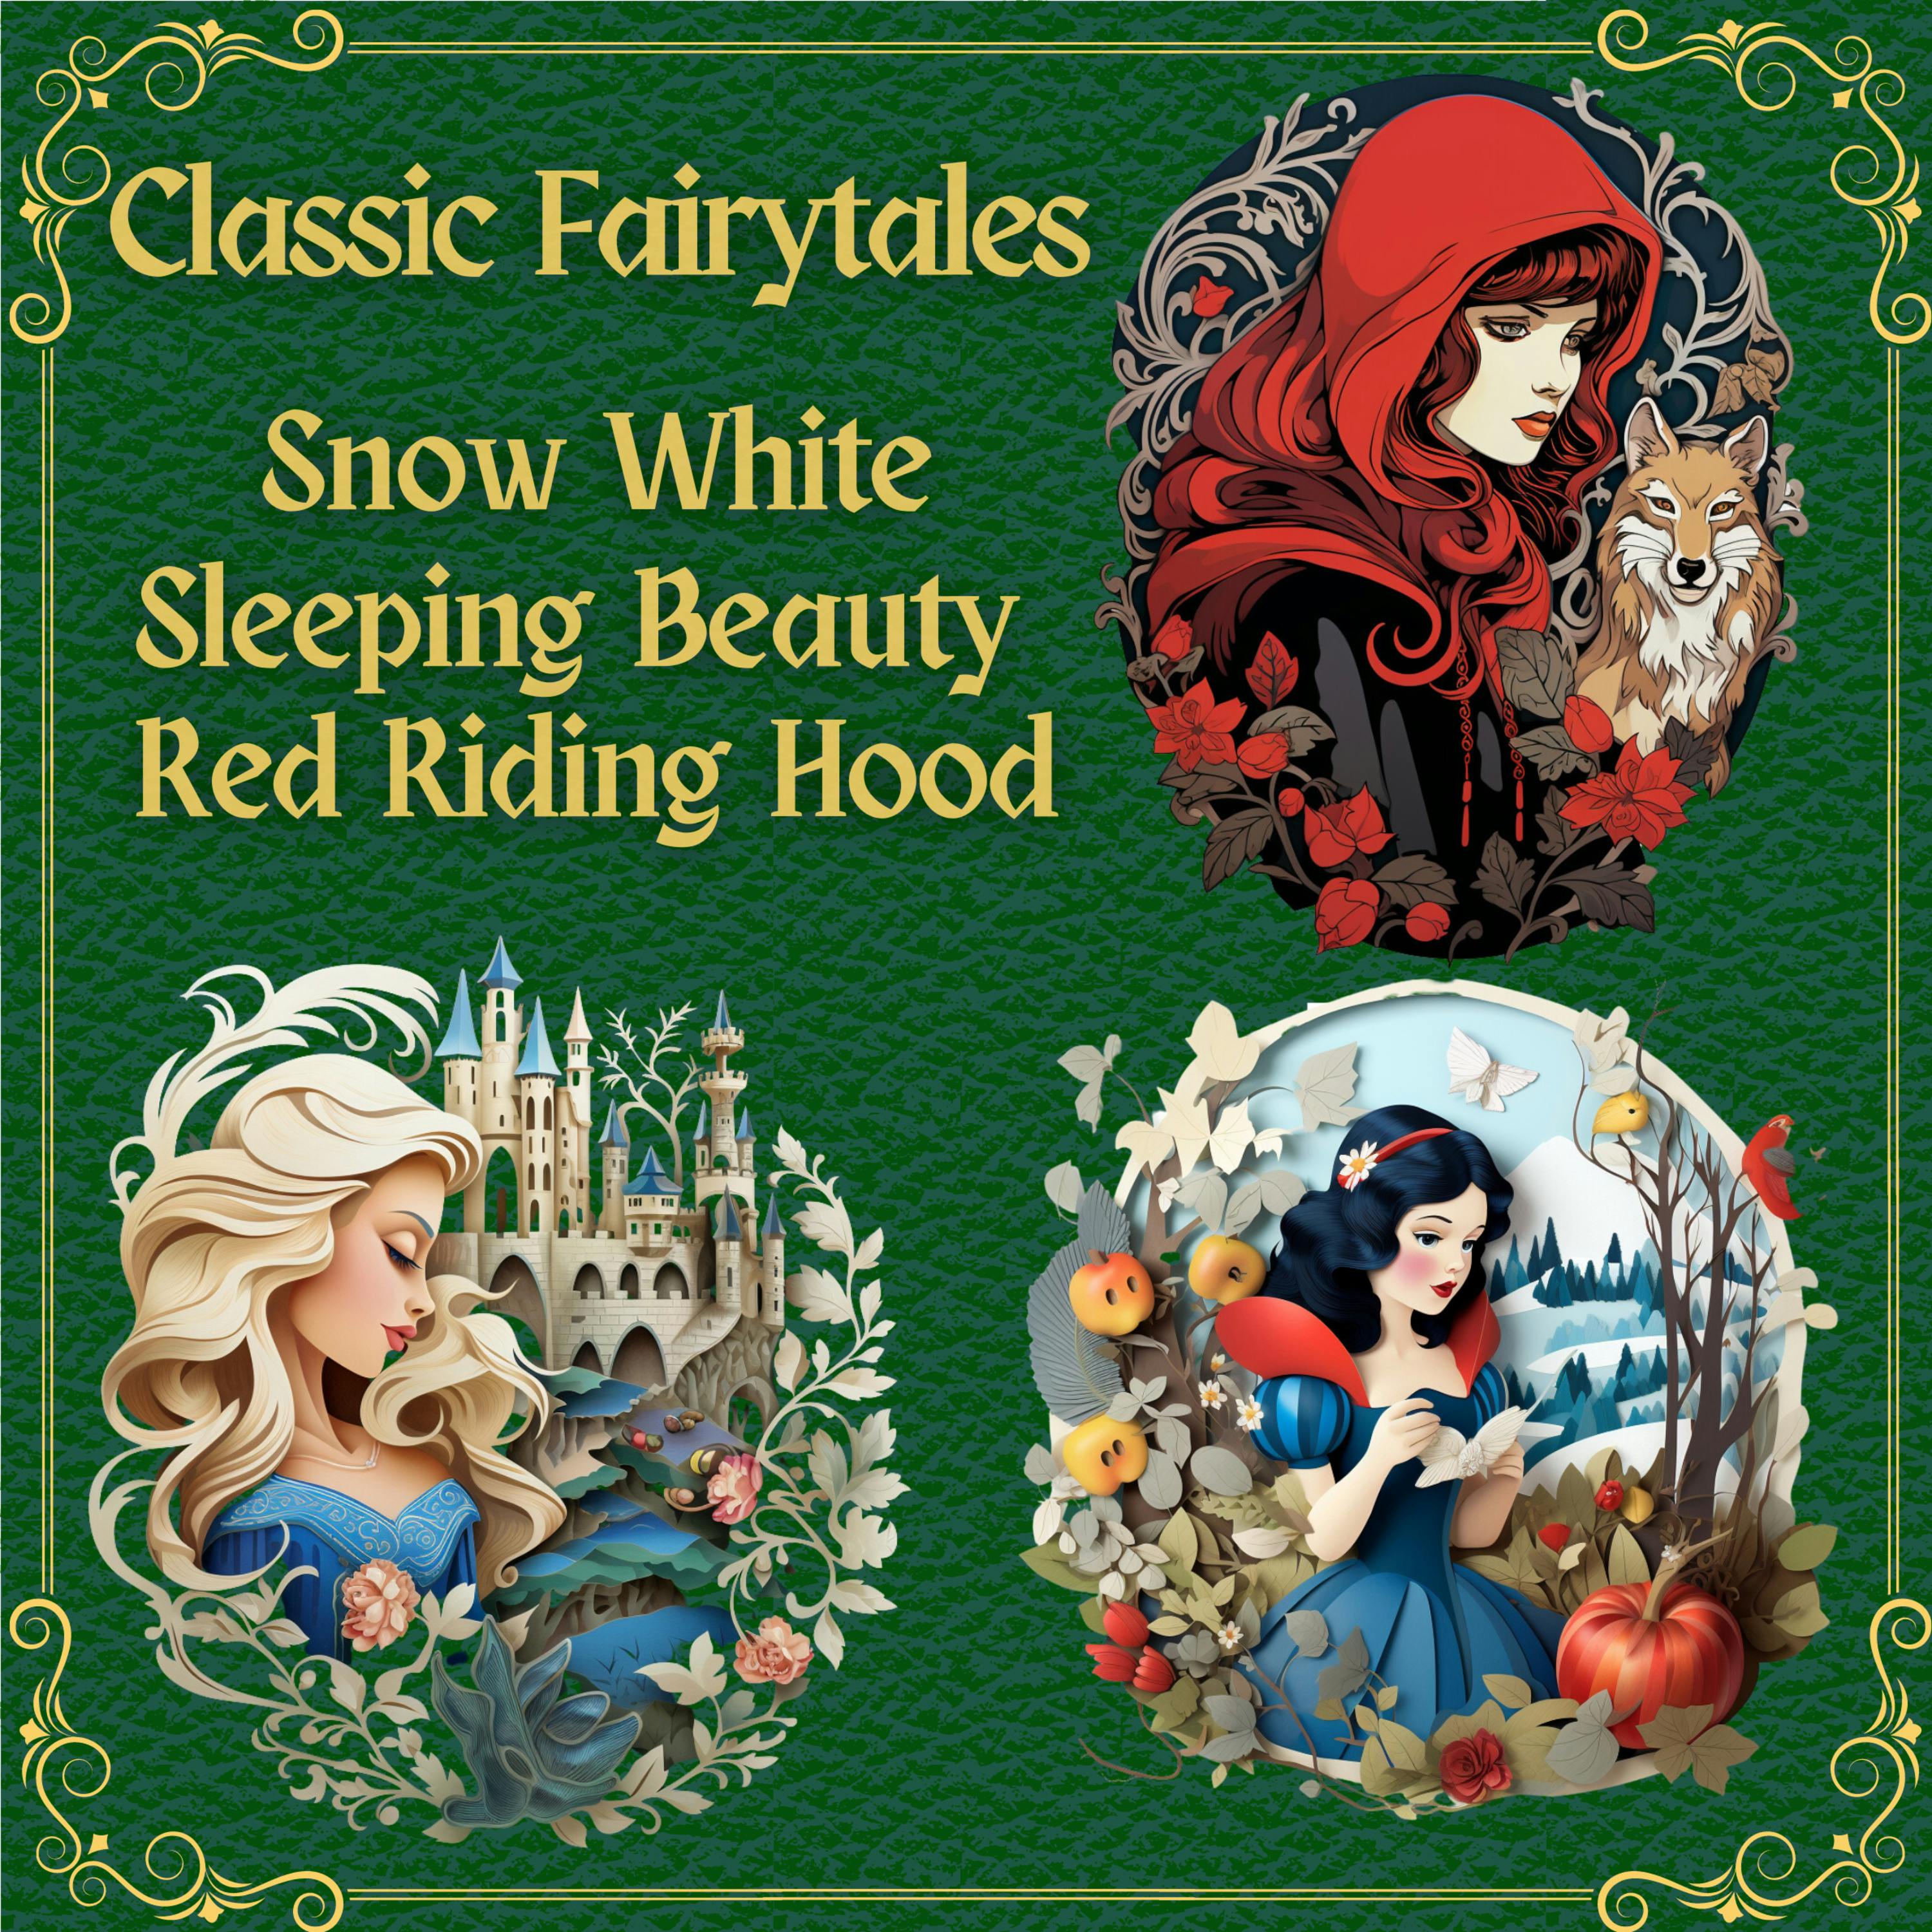 Bedtime Stories - Sleeping Beauty, Red Riding Hood and Snow White